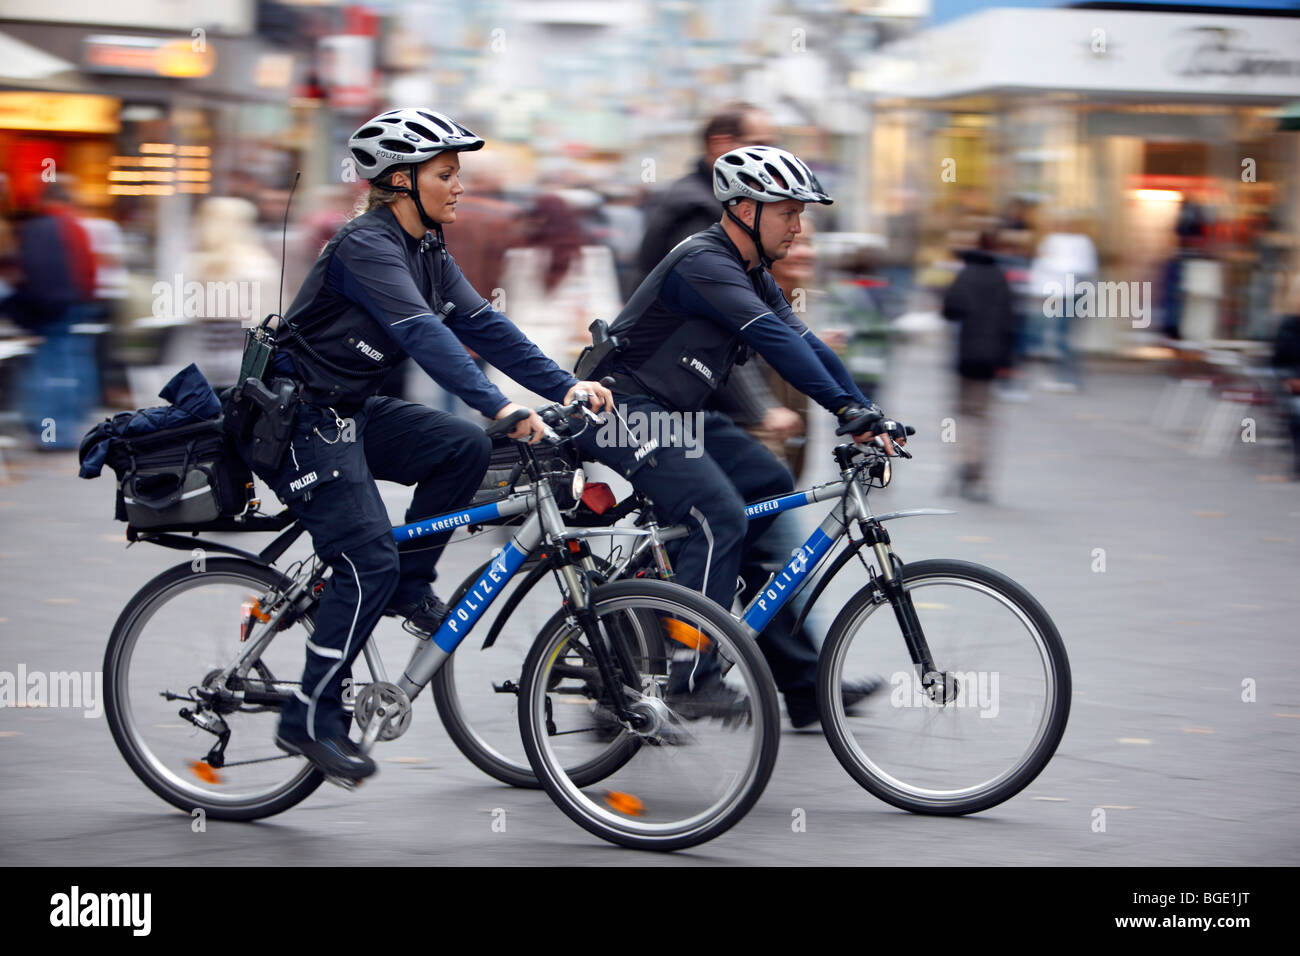 Bicycle patrols in a pedestrian area, Germany, Europe Stock Photo